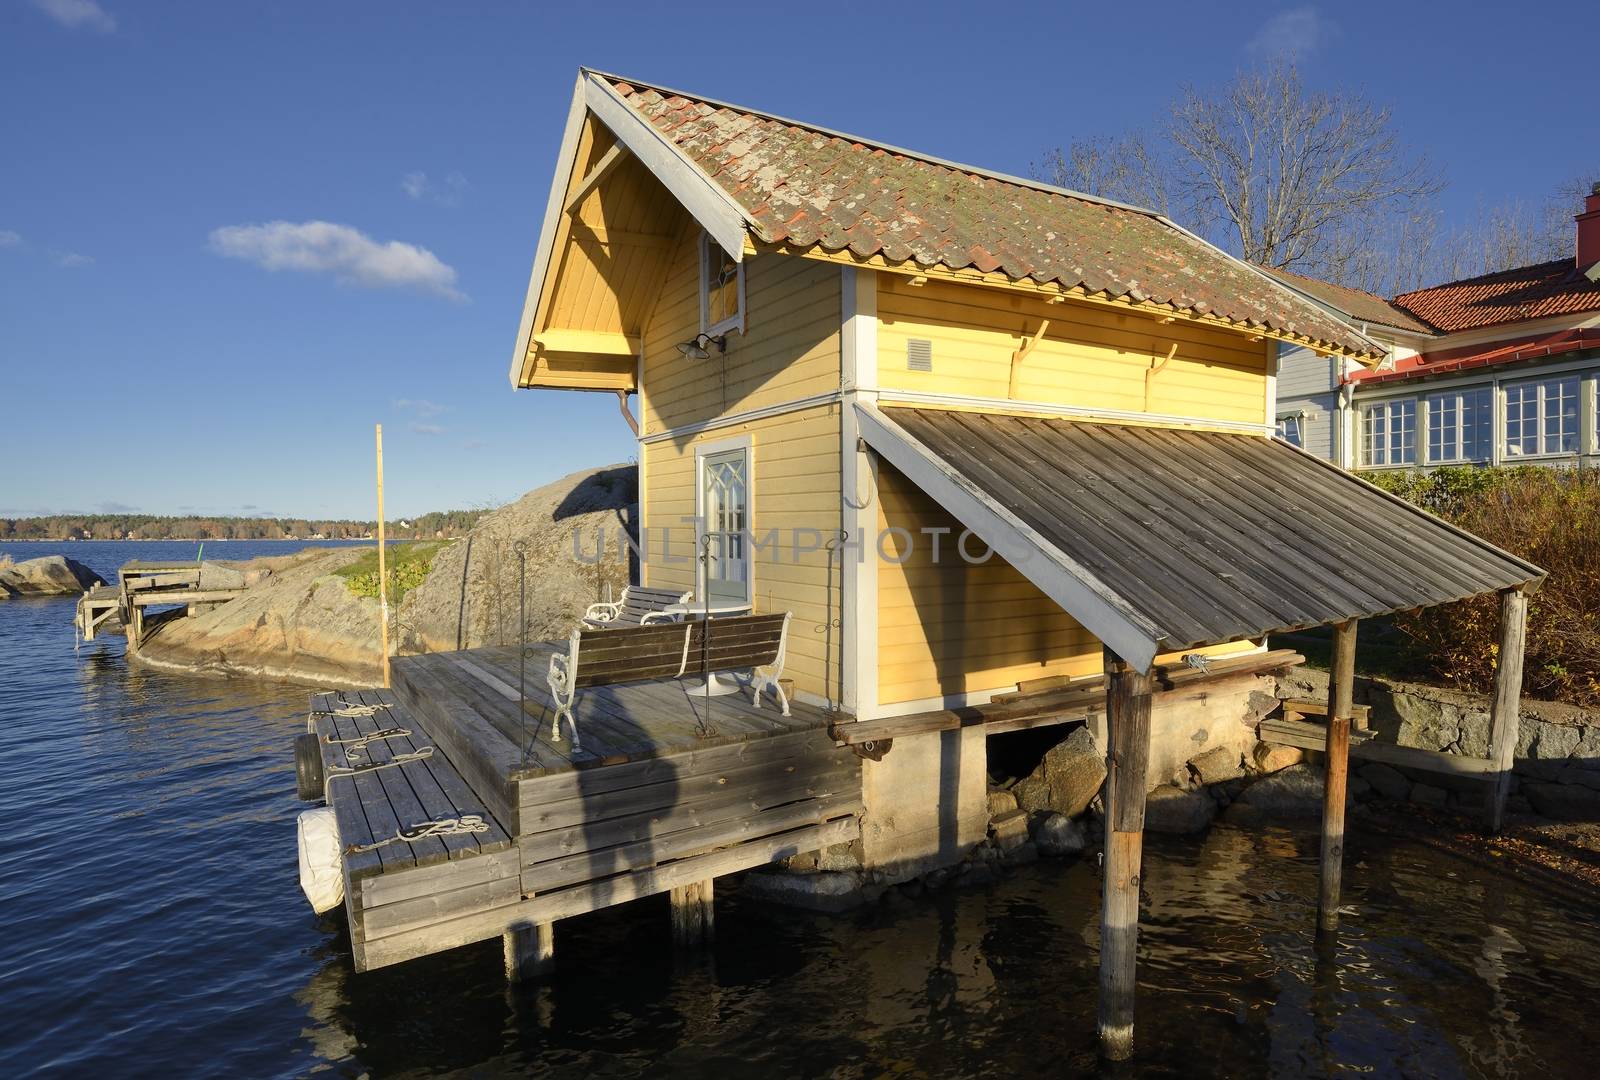 Boathouse in Vaxholm by a40757